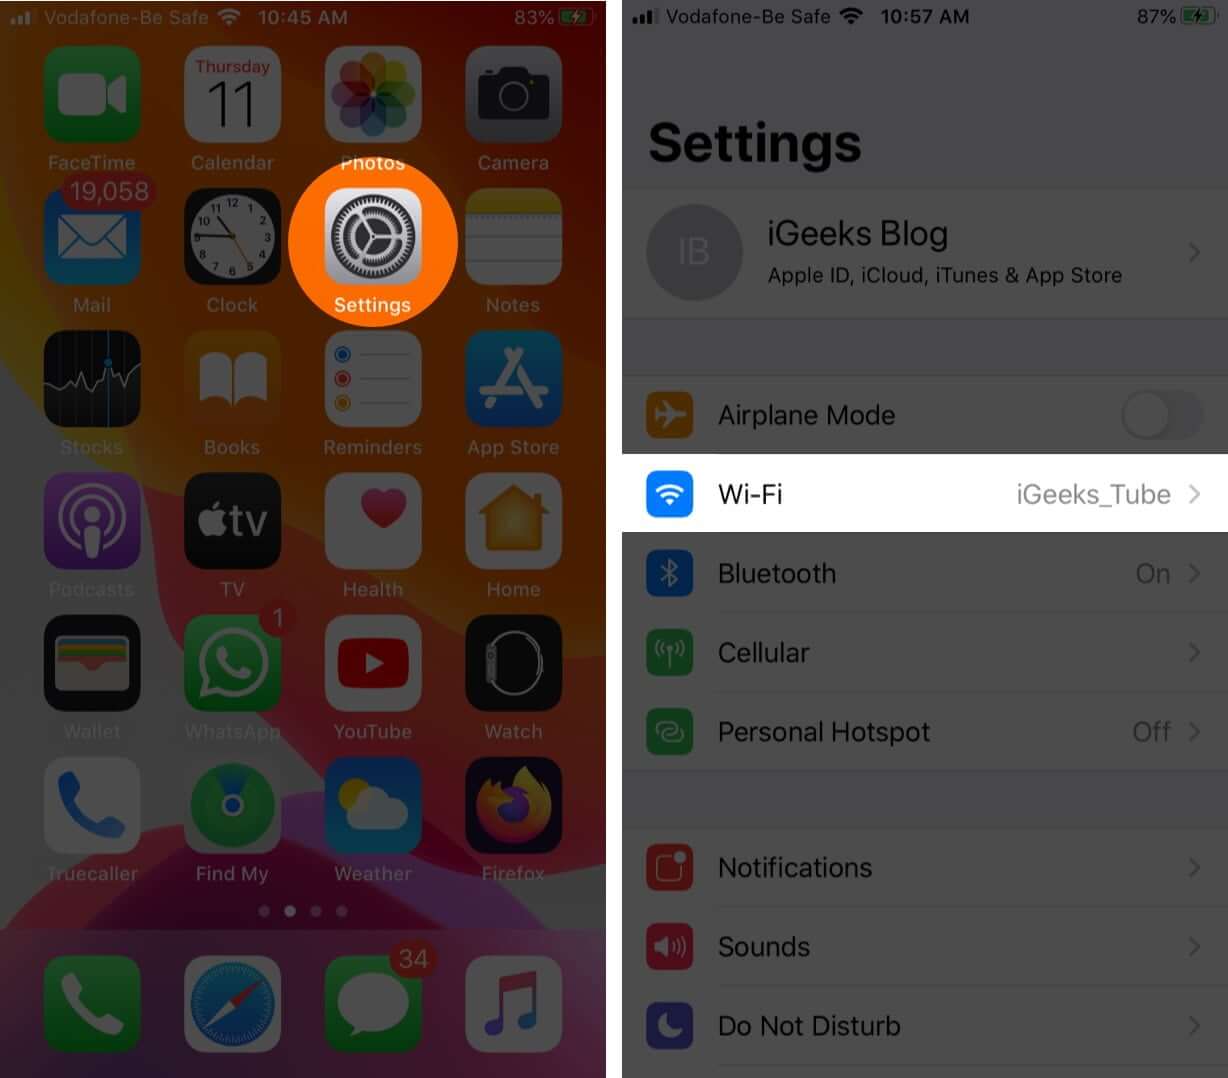 Launch Settings and Tap on Wi-Fi on iPhone